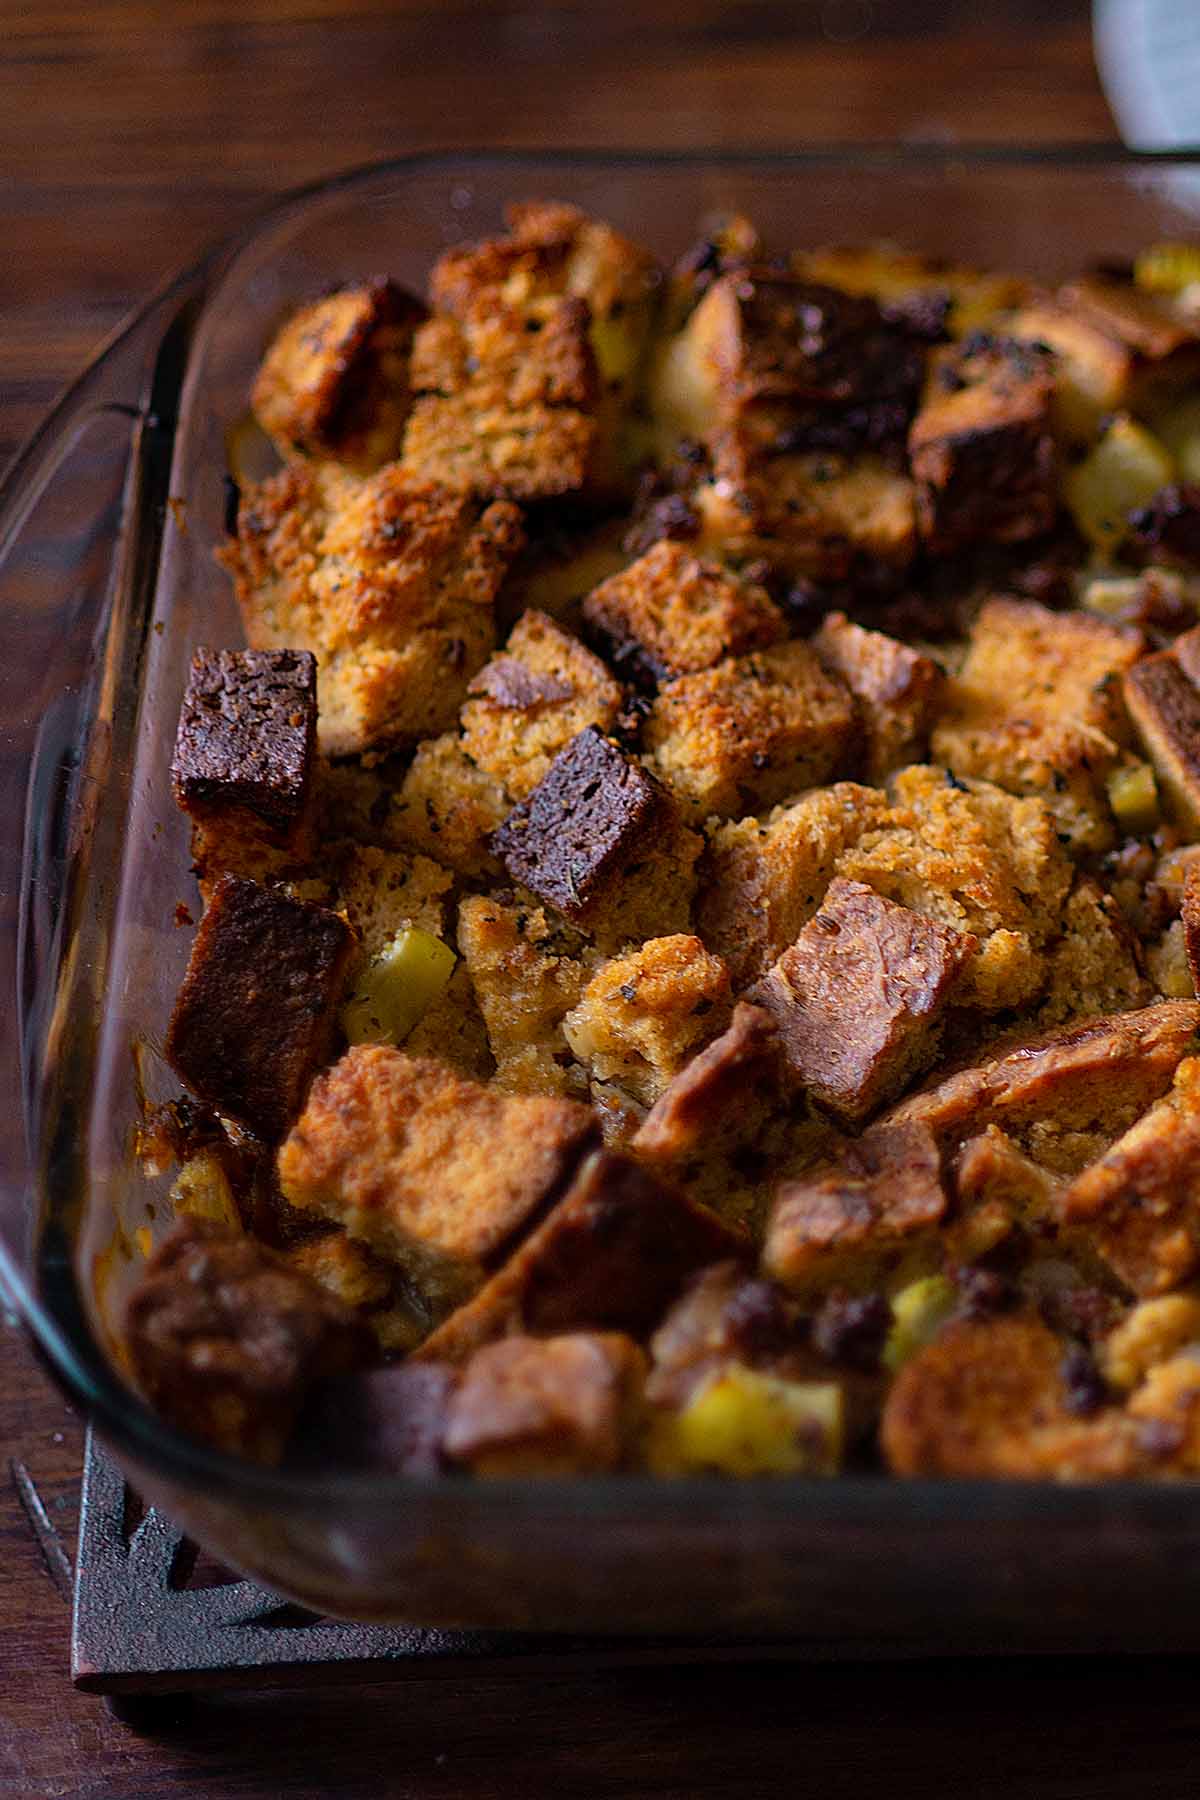 Italian Sausage Stuffing baked and served in a baking dish.